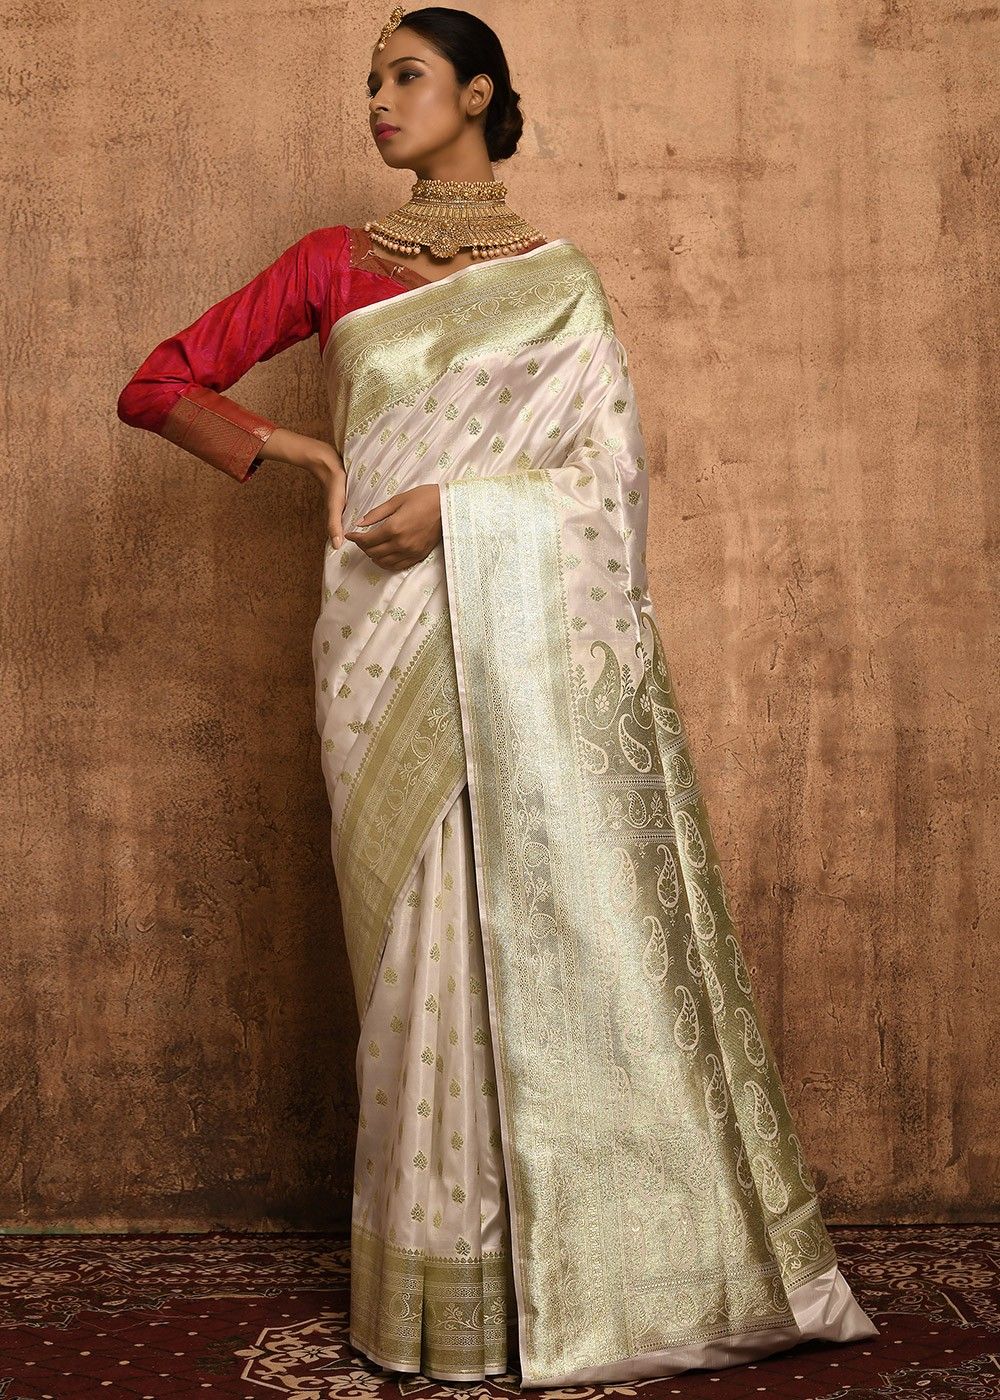 Buy BANARASI PATOLA White White With Gold Zari Woven Organza Silk Saree  With Beautiful Floral Weave Tilfi Meena Work Pattern With Blouse Piece |  Shoppers Stop